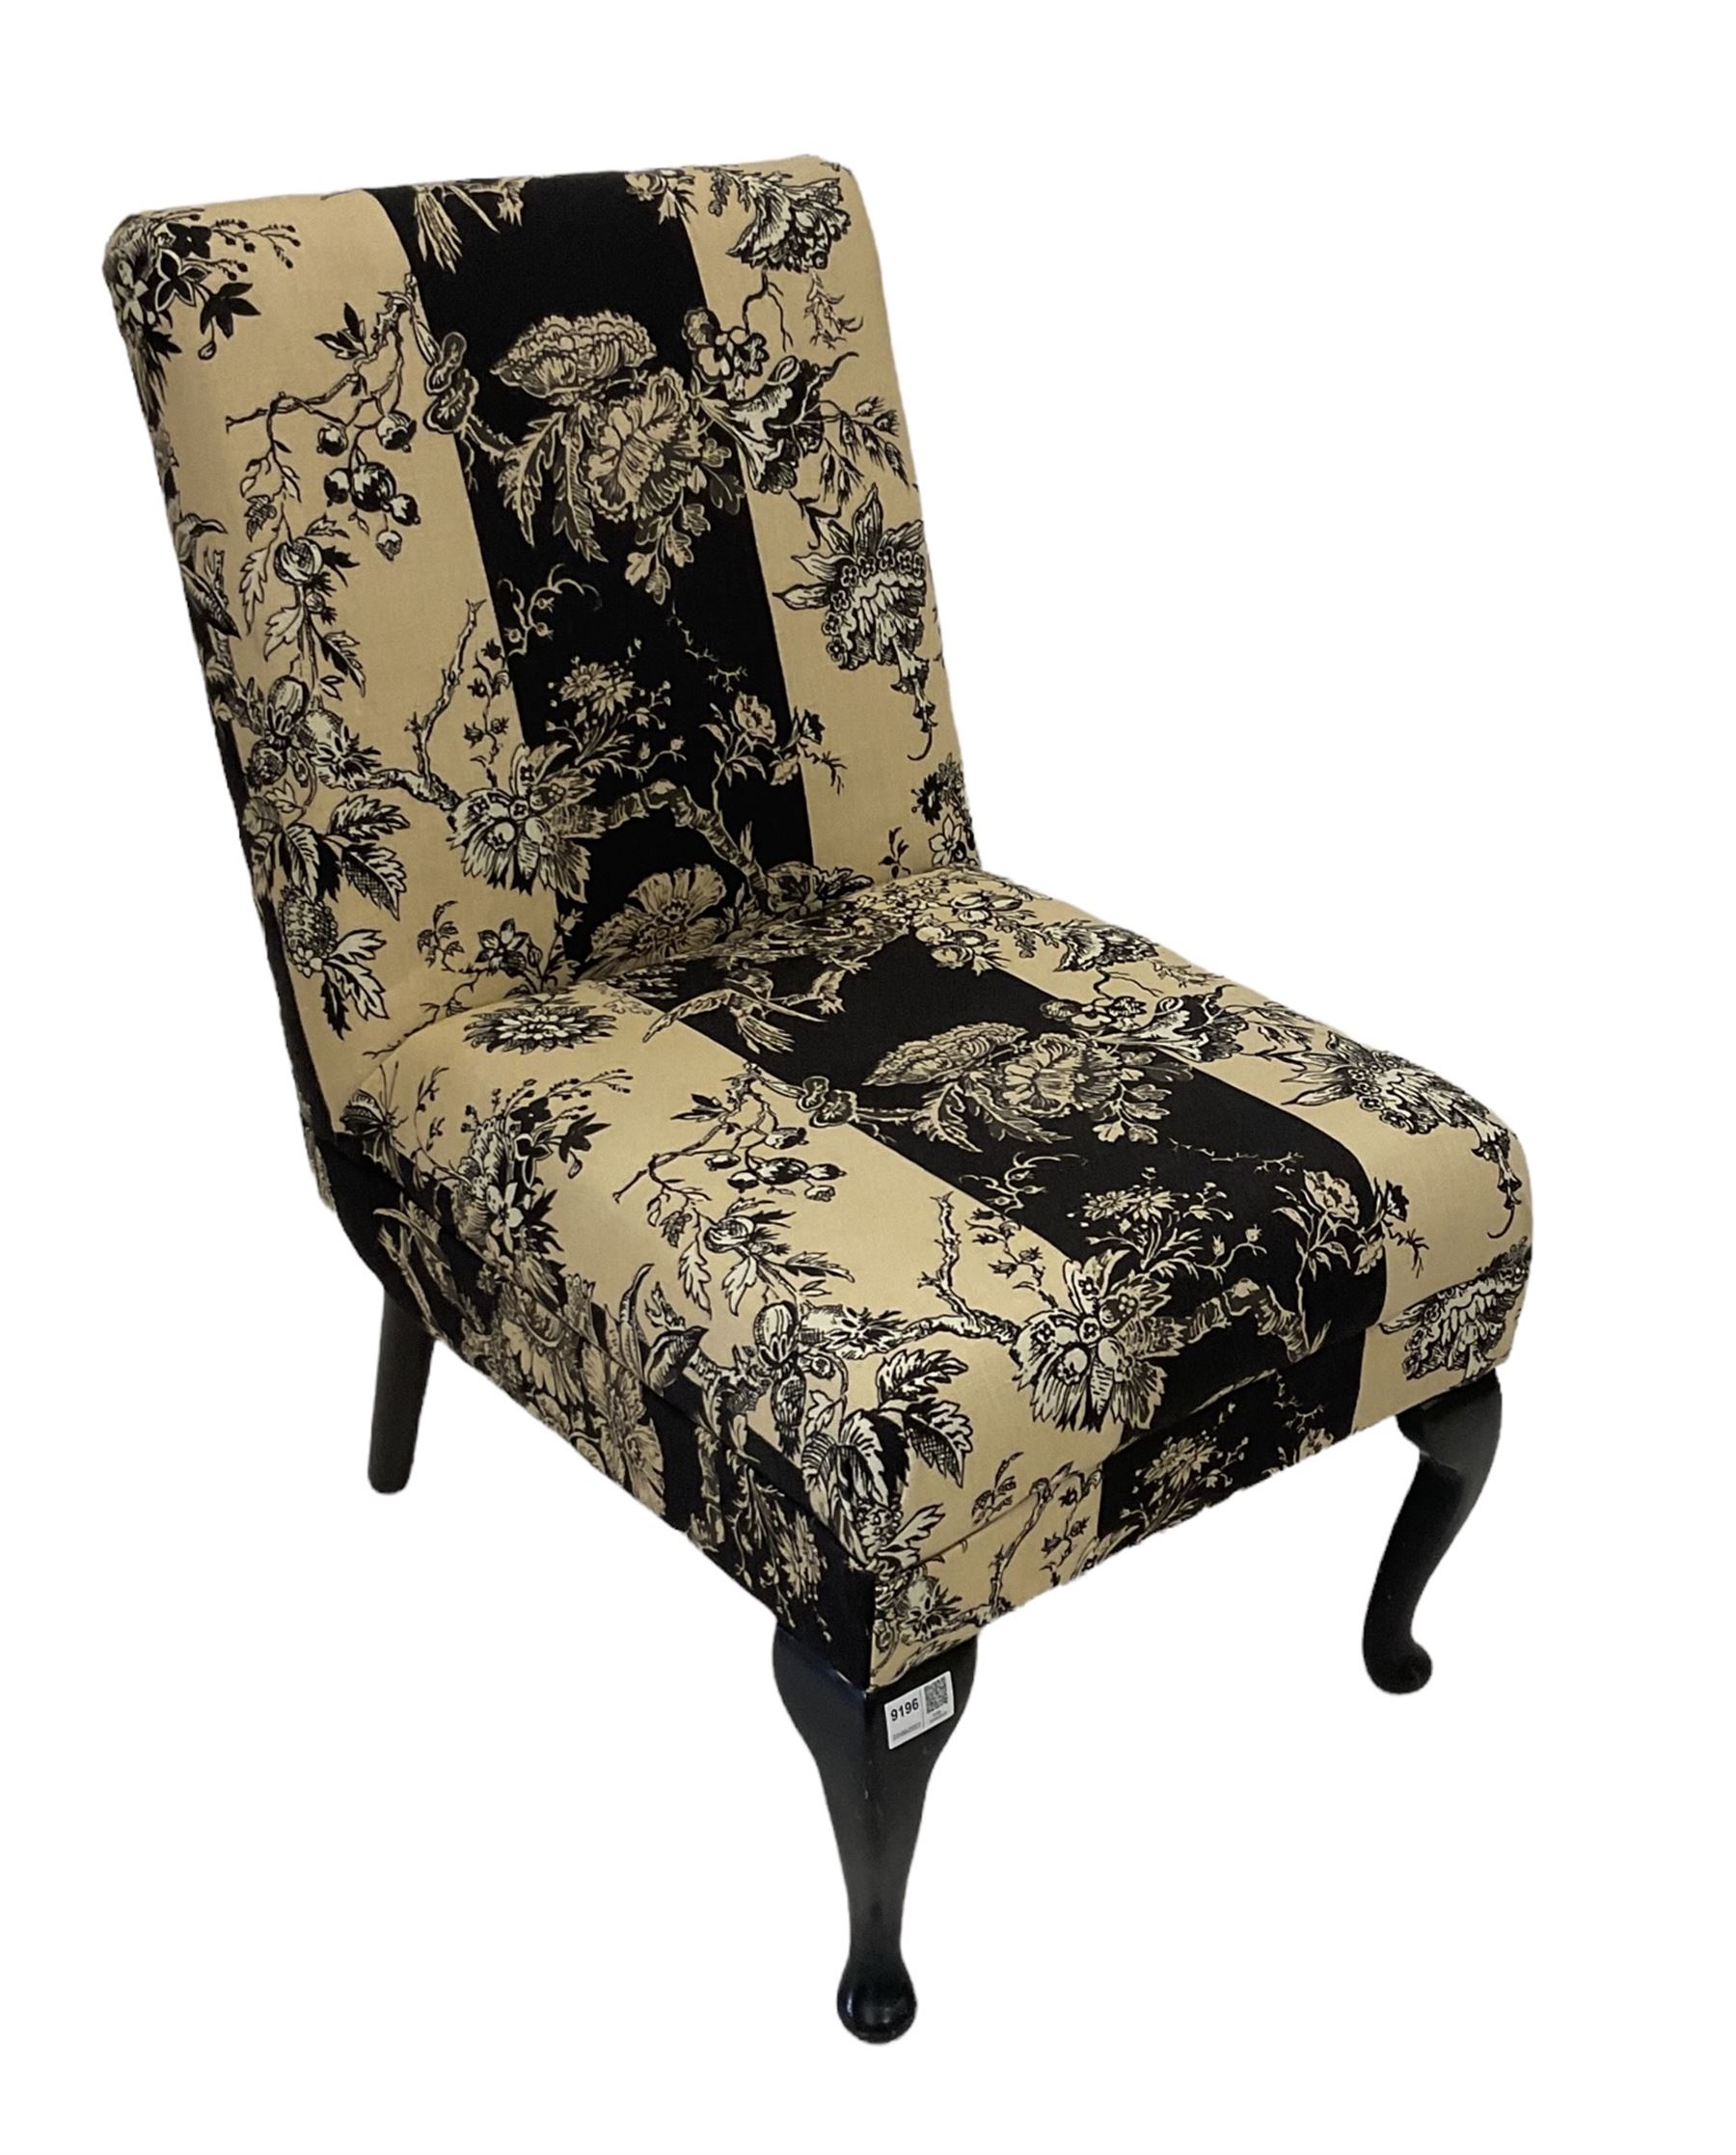 Chair upholstered in black and cream fabric